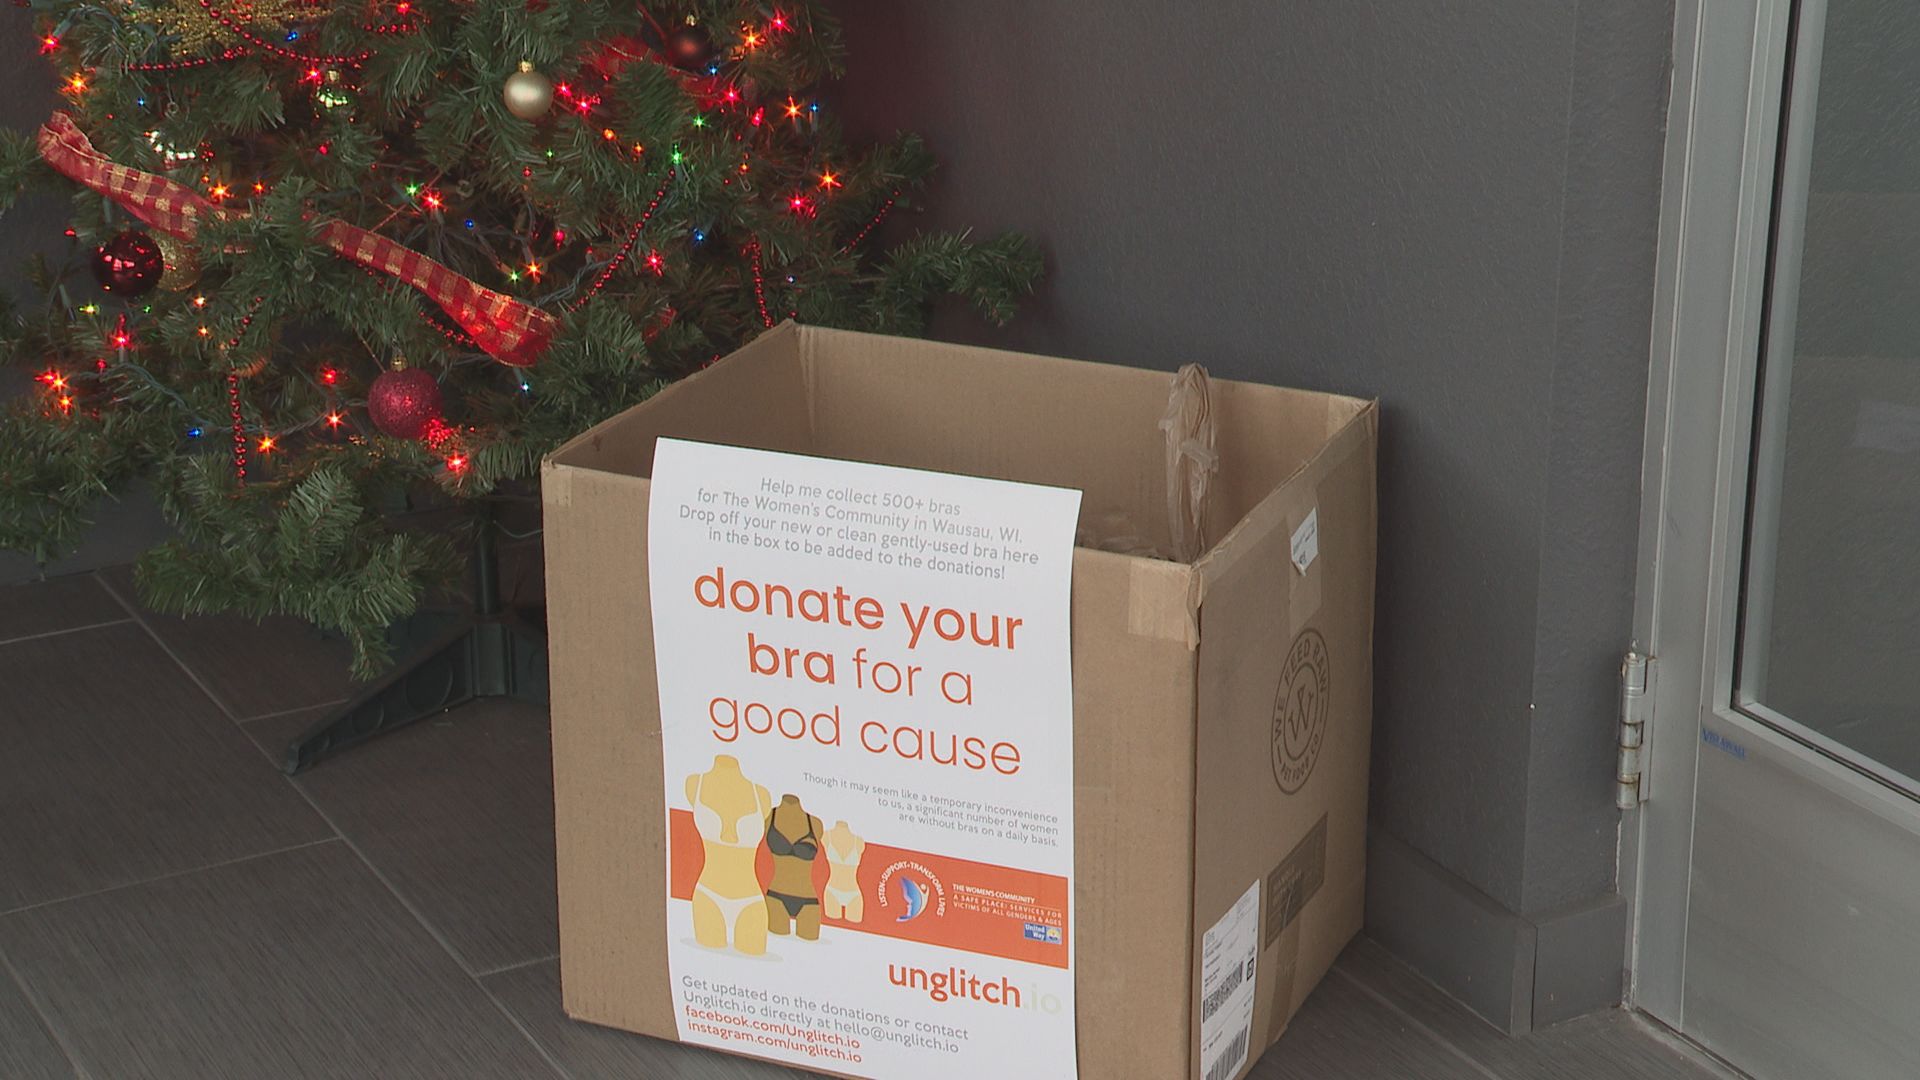 Woman organizes bra drive for local women's shelter